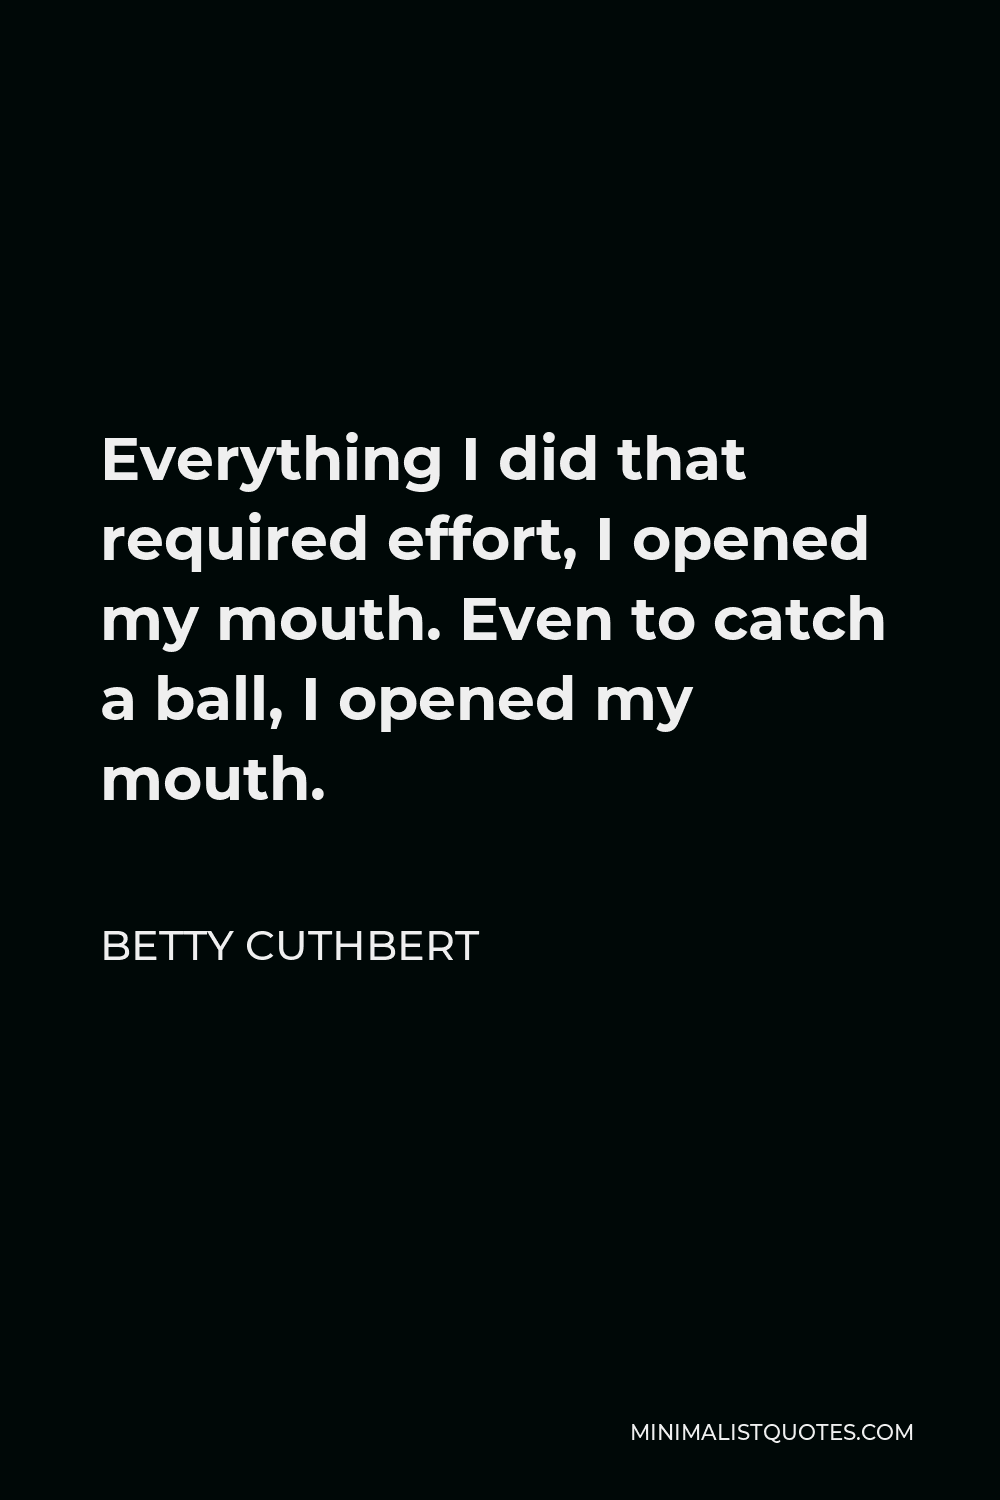 Betty Cuthbert Quote - Everything I did that required effort, I opened my mouth. Even to catch a ball, I opened my mouth.